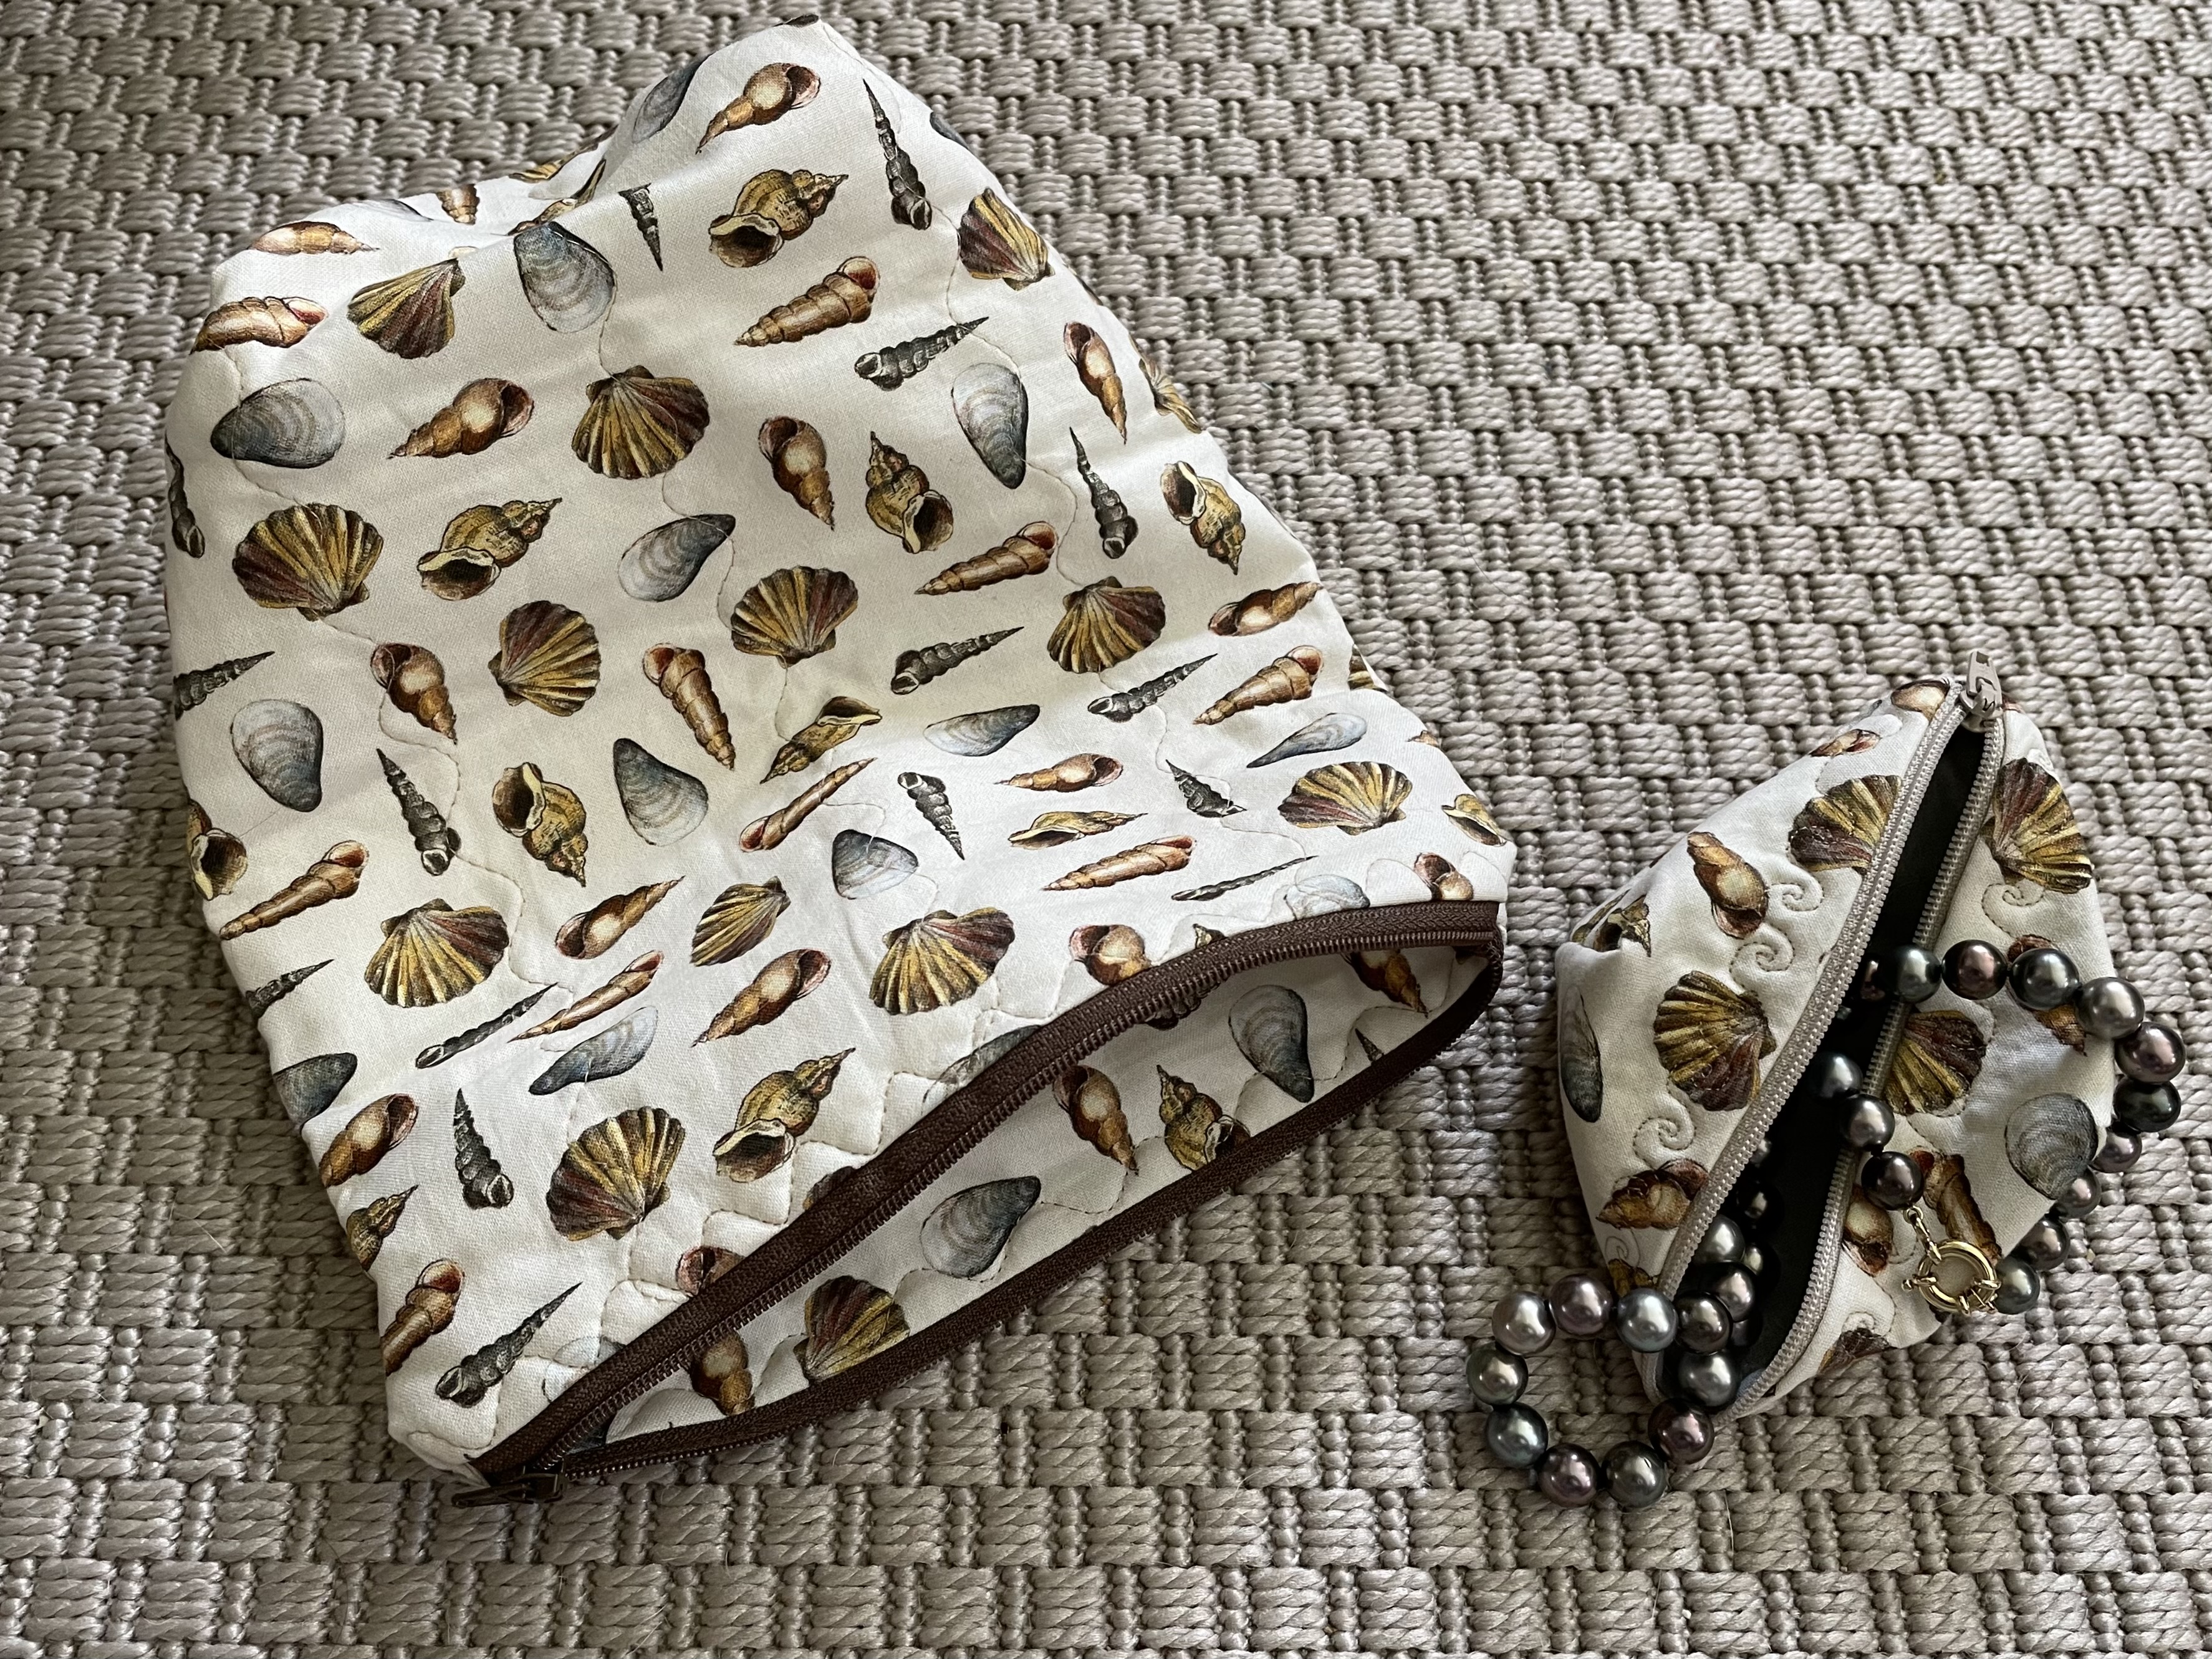 seashell fabric has little waves by the zipper on the smaller pouch, and the flower fabric has little bees by the zipper! The pearl strands are both Kamoka